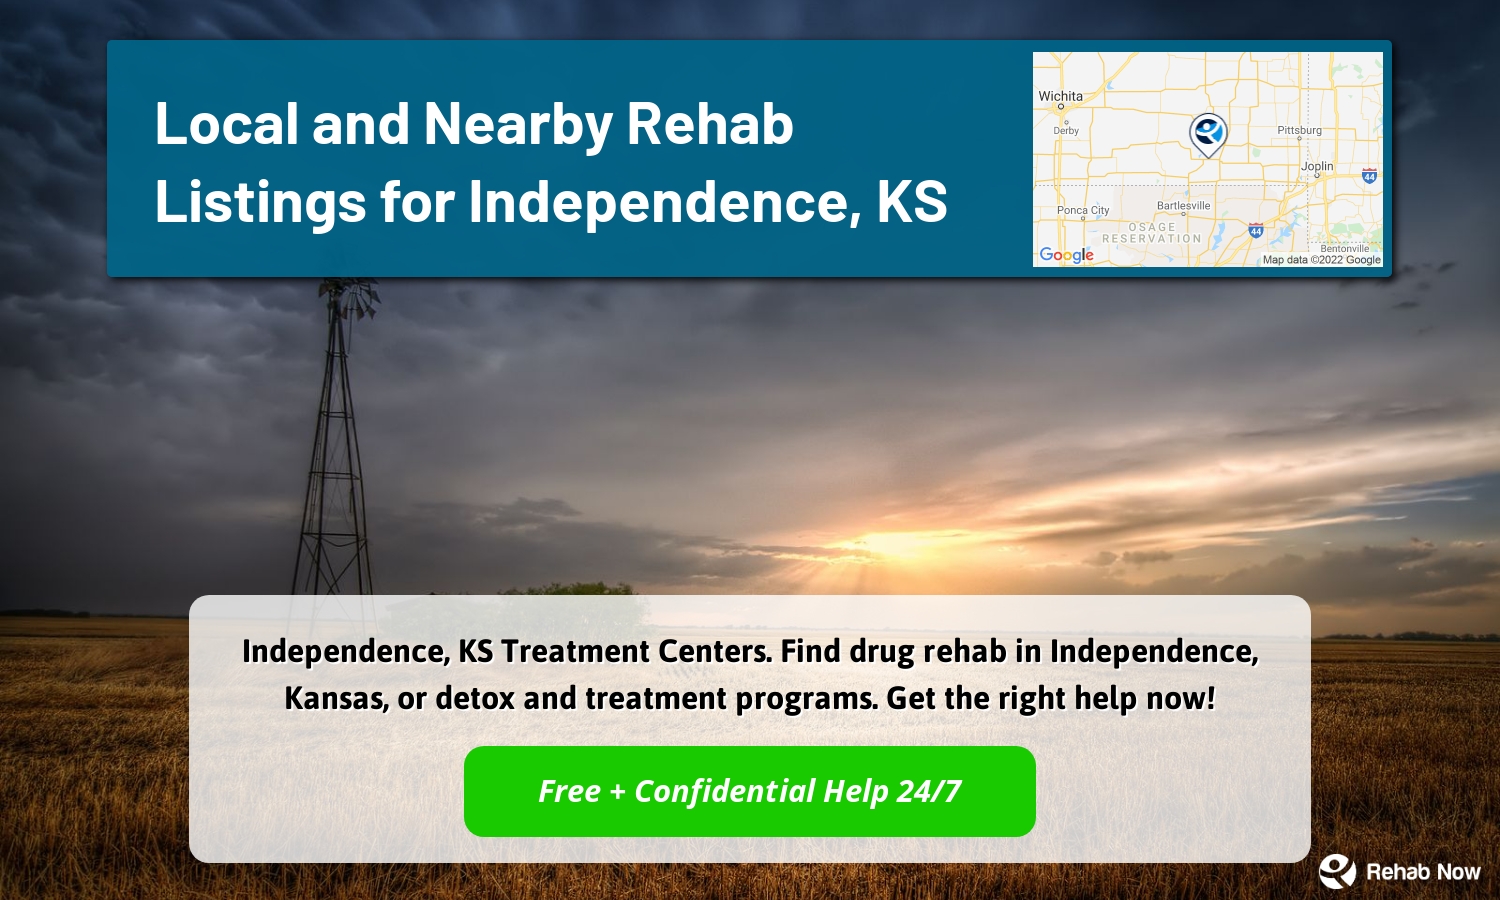 Independence, KS Treatment Centers. Find drug rehab in Independence, Kansas, or detox and treatment programs. Get the right help now!